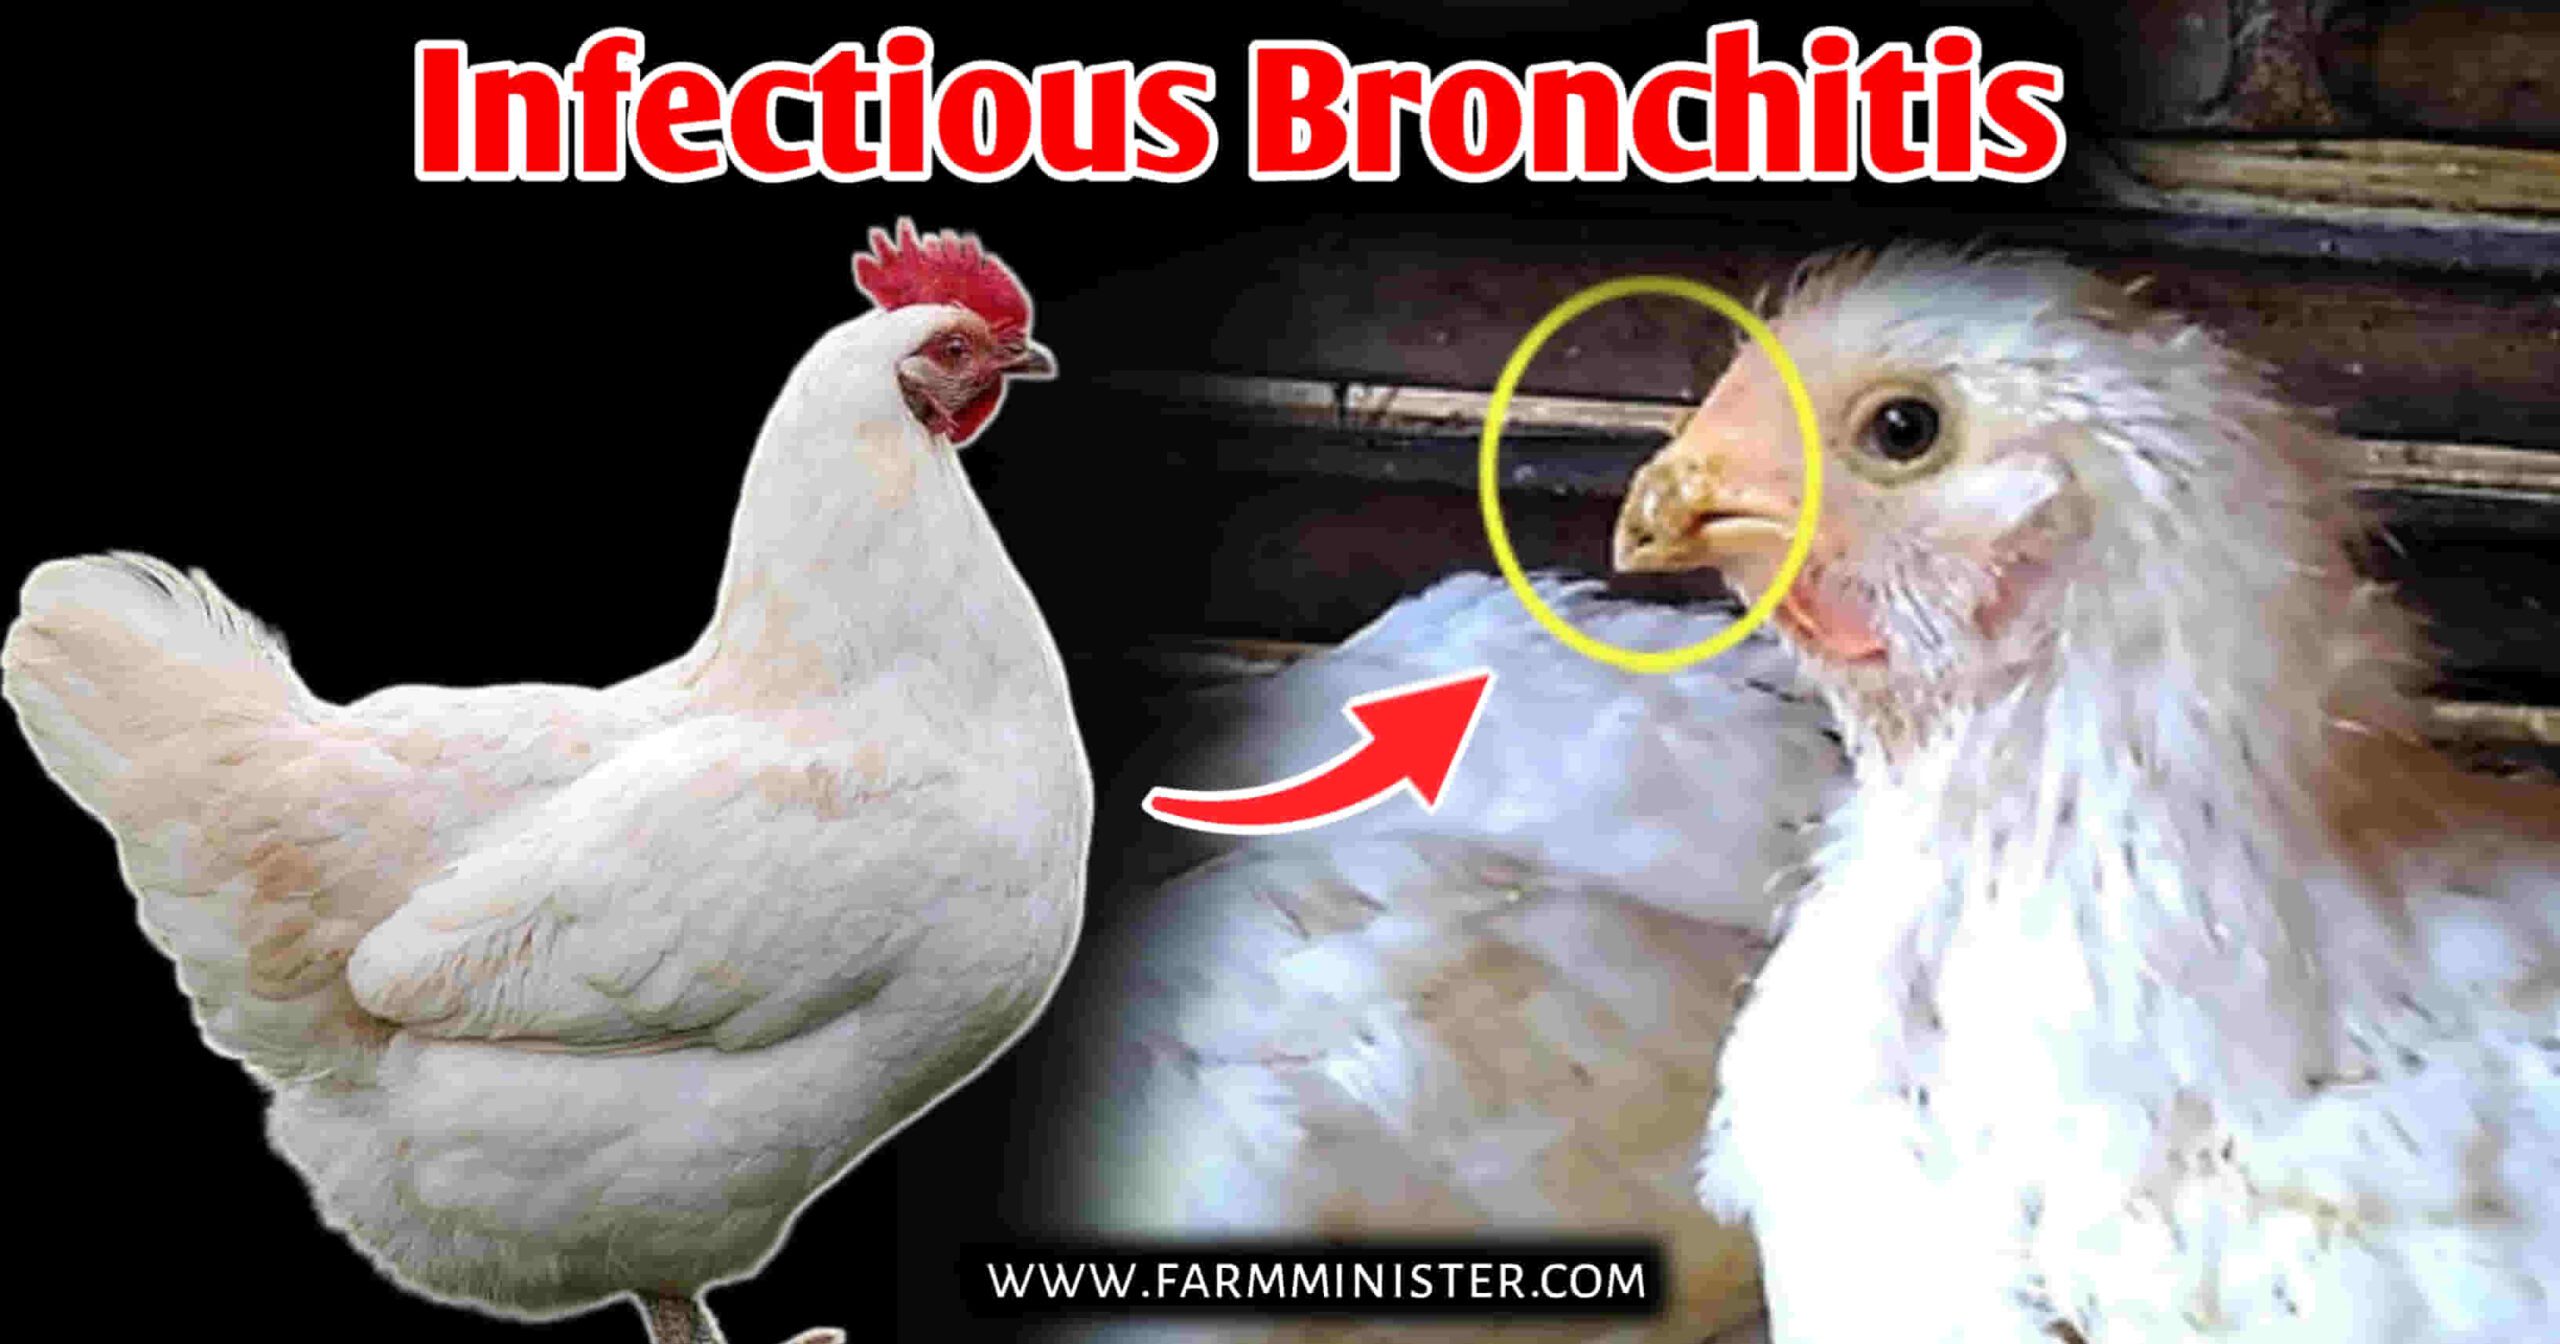 Infectious Bronchitis in chicken